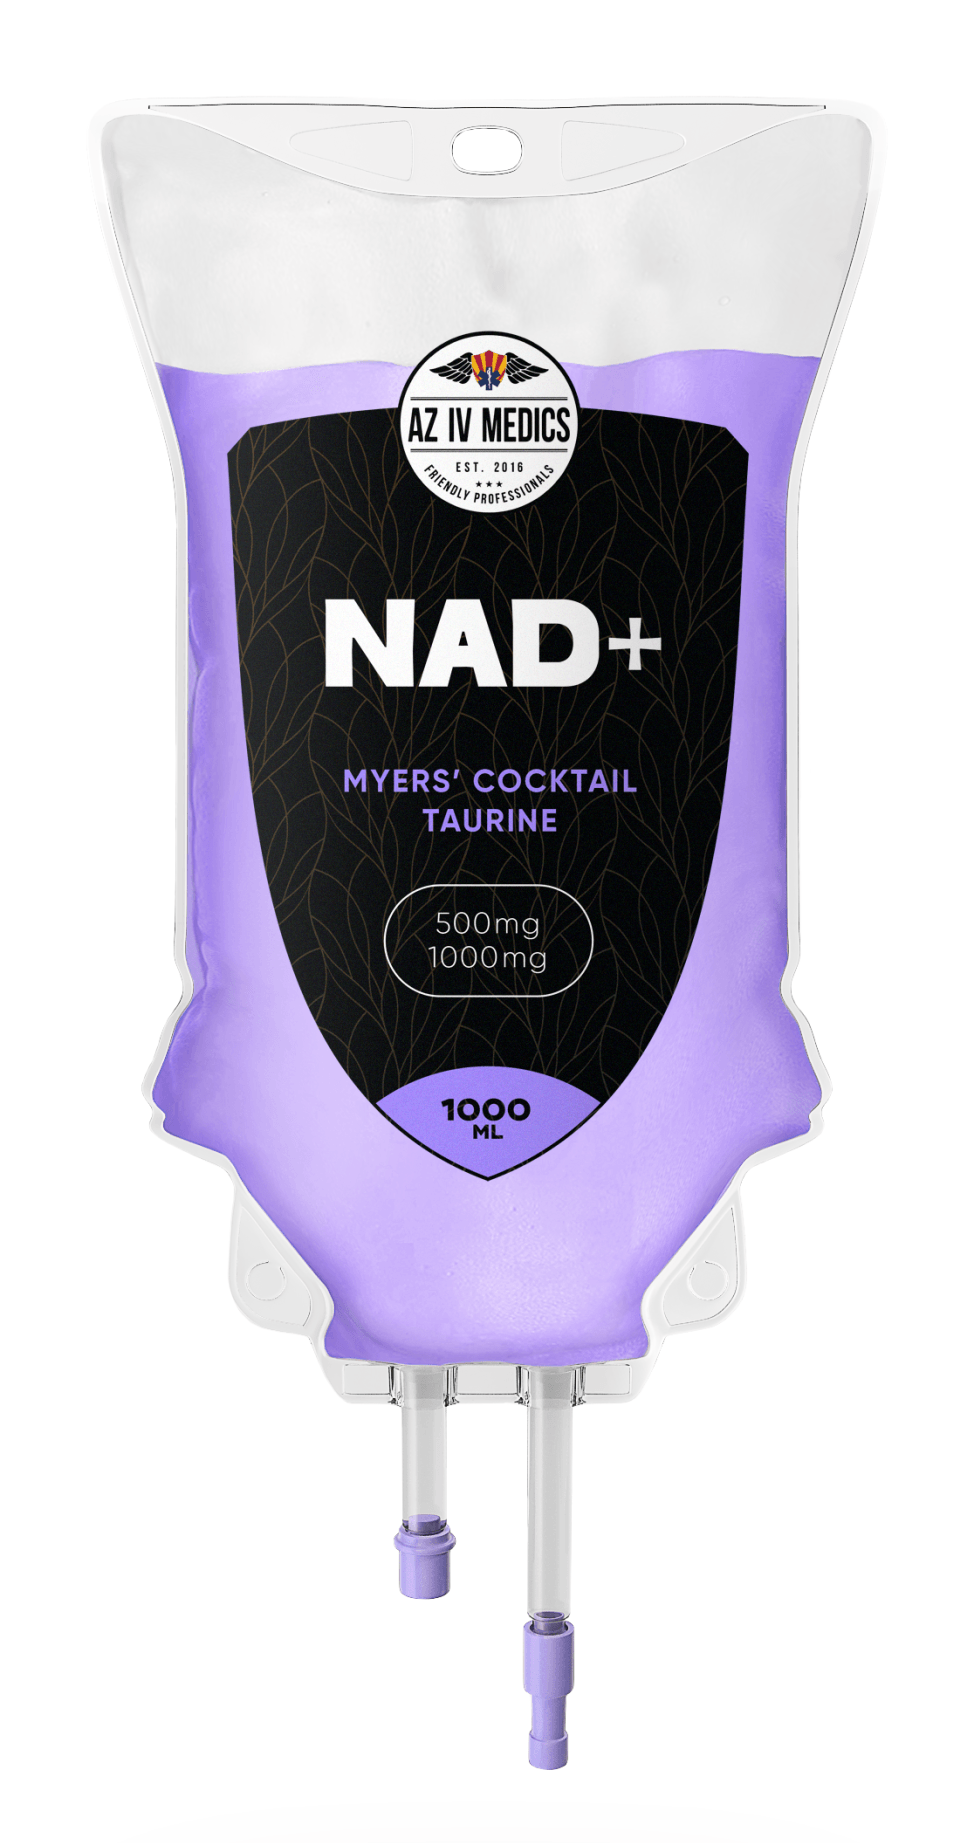 NAD IV Therapy